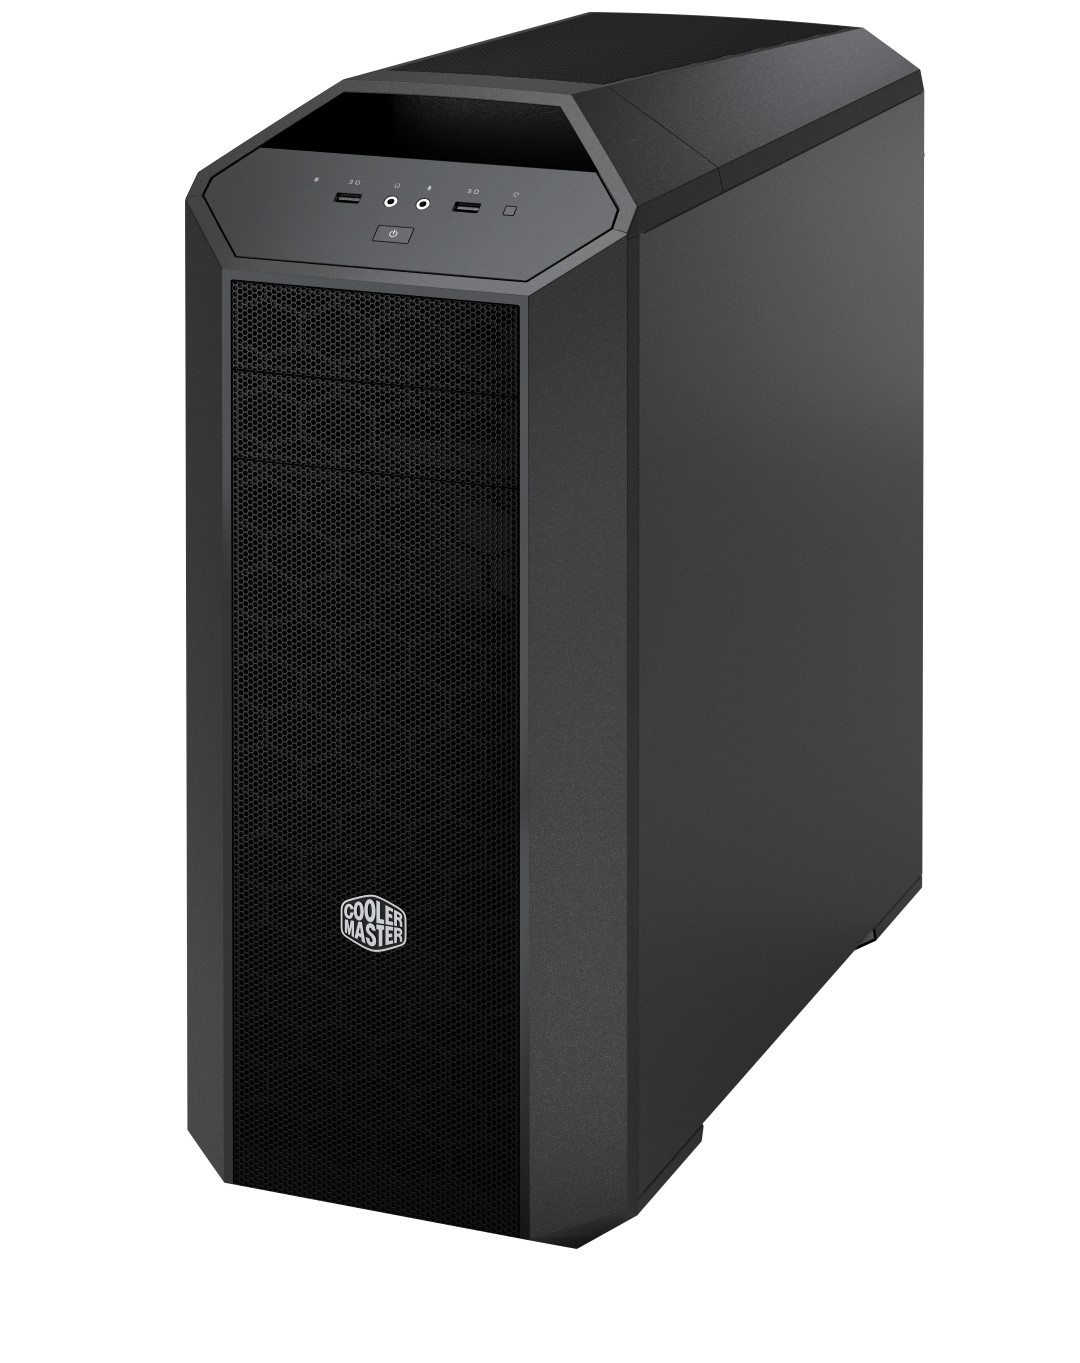 Cooler Master MasterCase 5 available on this 20th August 33